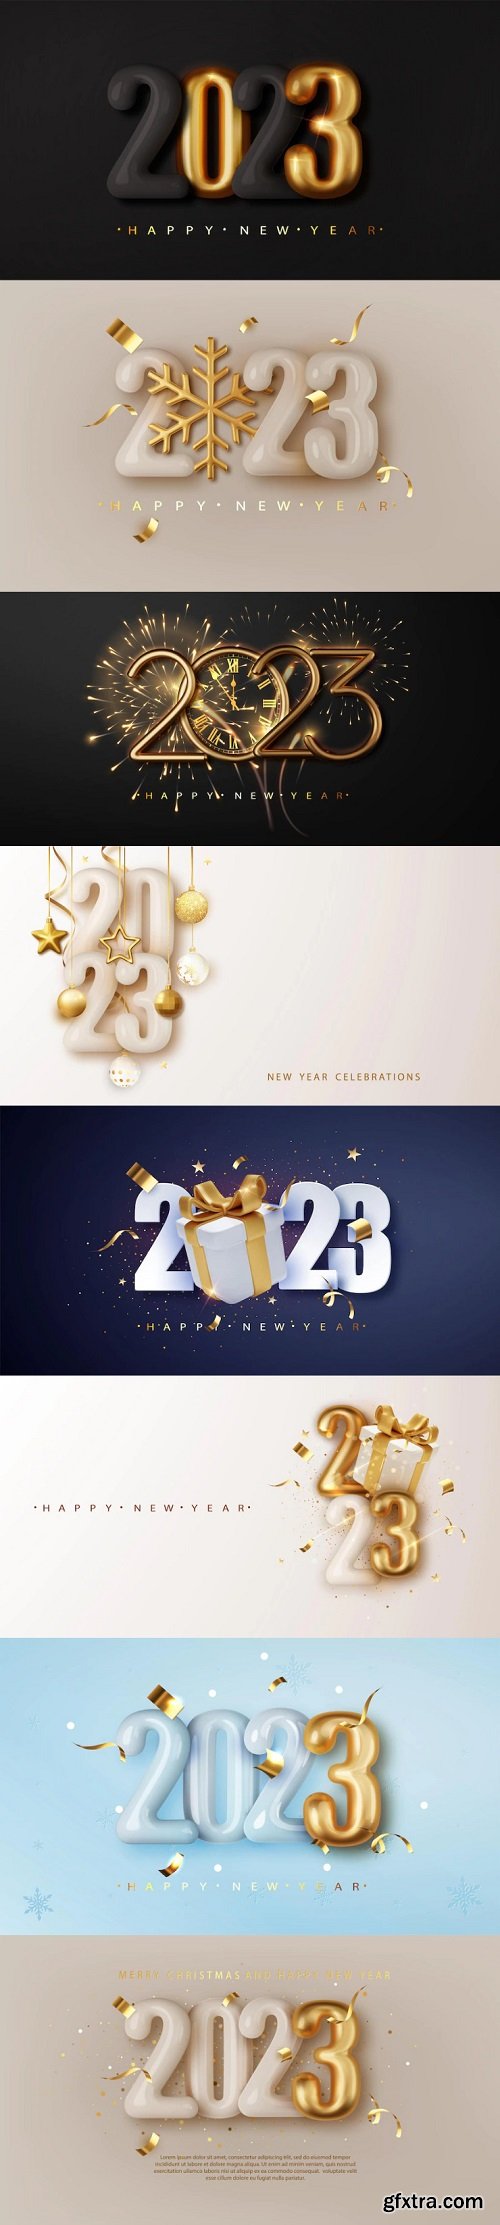 2023 3d realistic happy new year and merry christmas 2023 greeting card